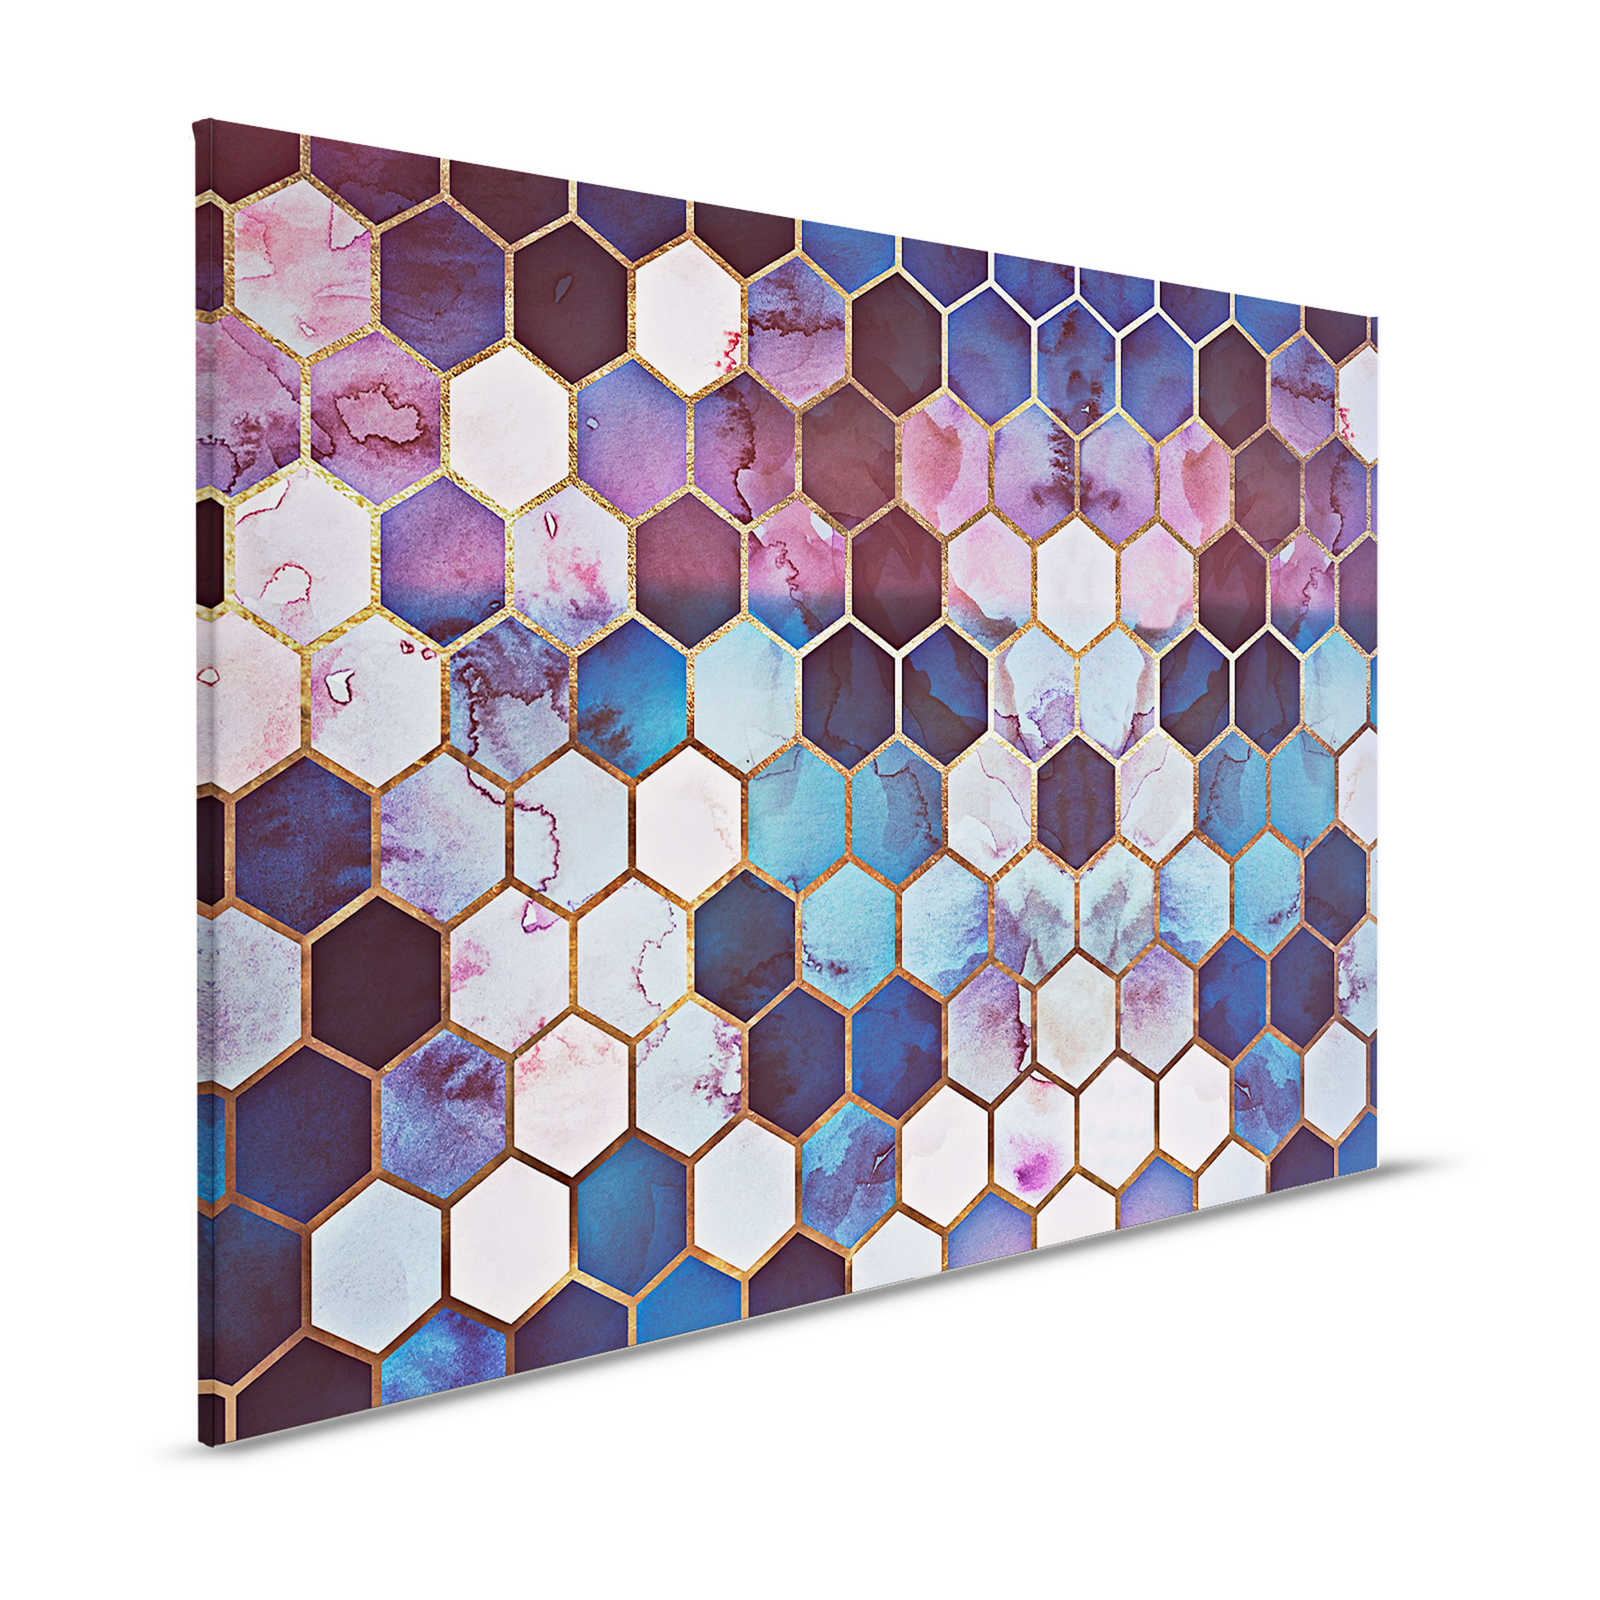 Canvas painting Watercolour Marble with Golden Honeycomb Pattern - 1.20 m x 0.80 m
